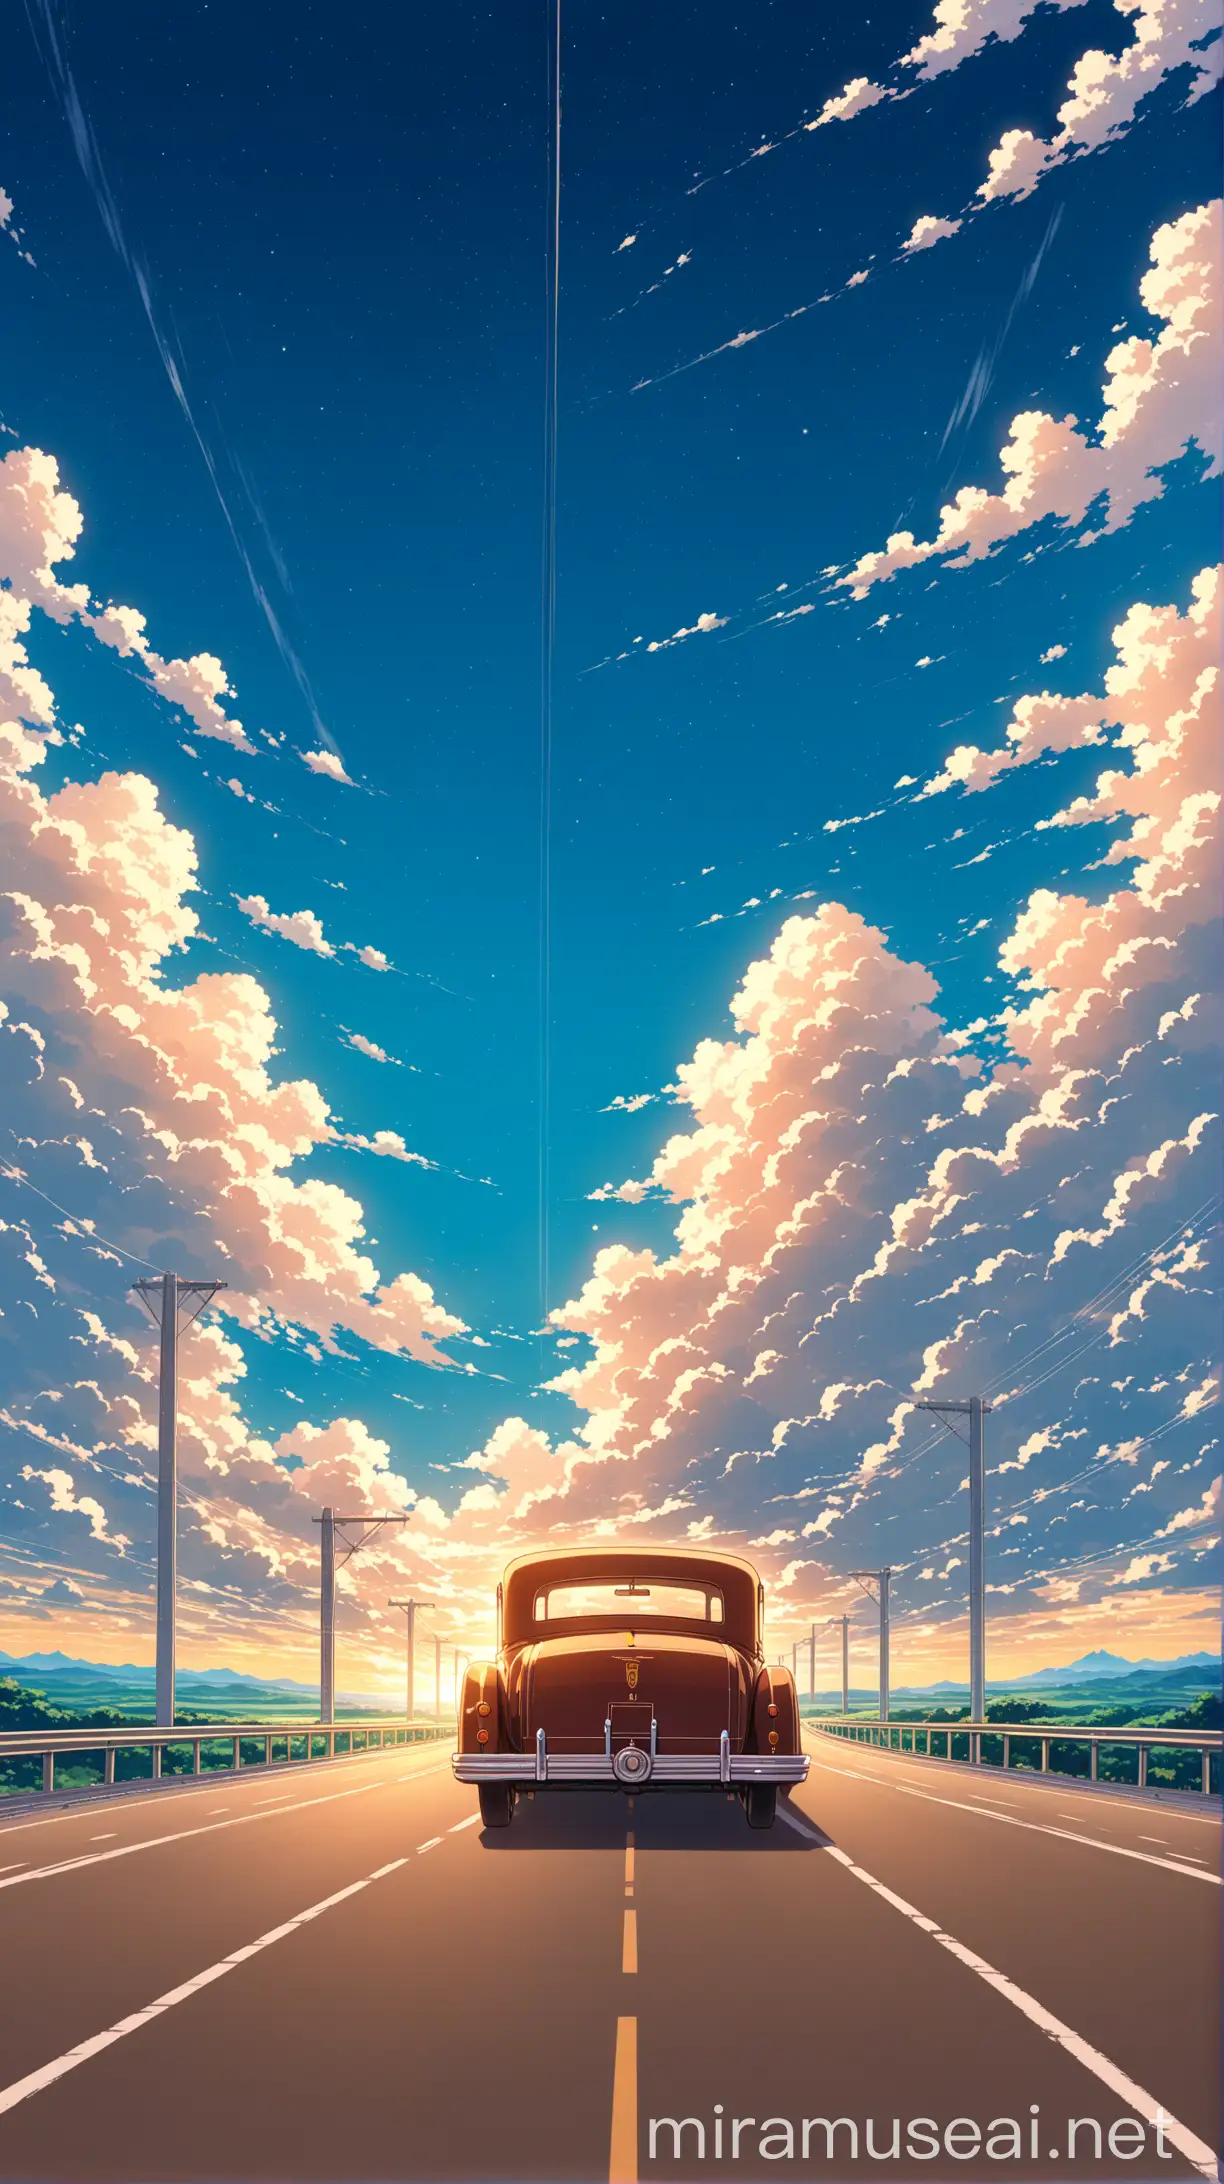 Vintage Long Car Driving on Whispering Highway under Anime Sky